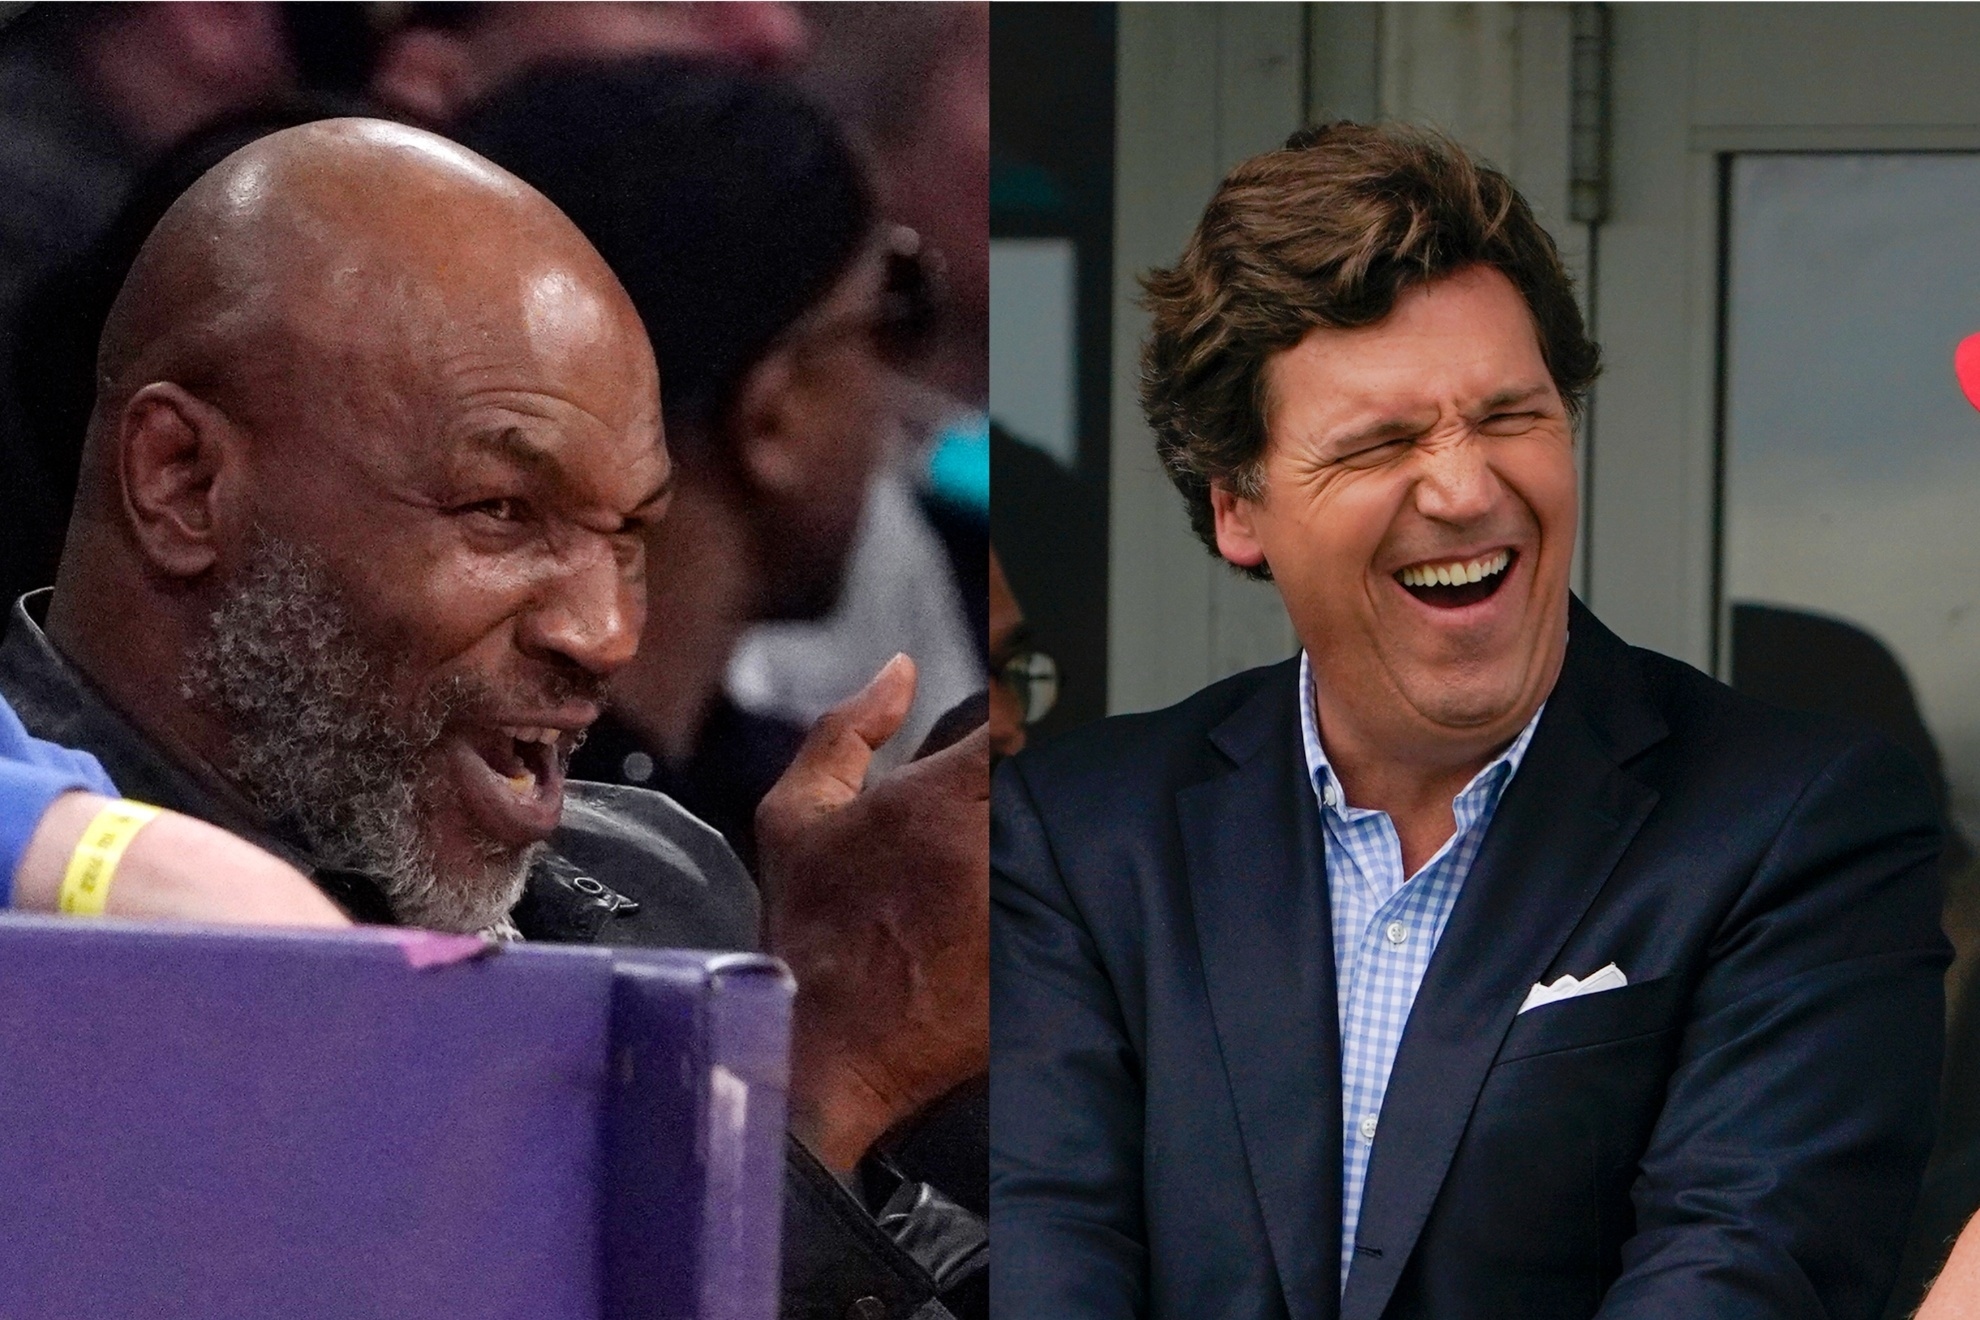 Mashup image of Mike Tyson and Tucker Carlson